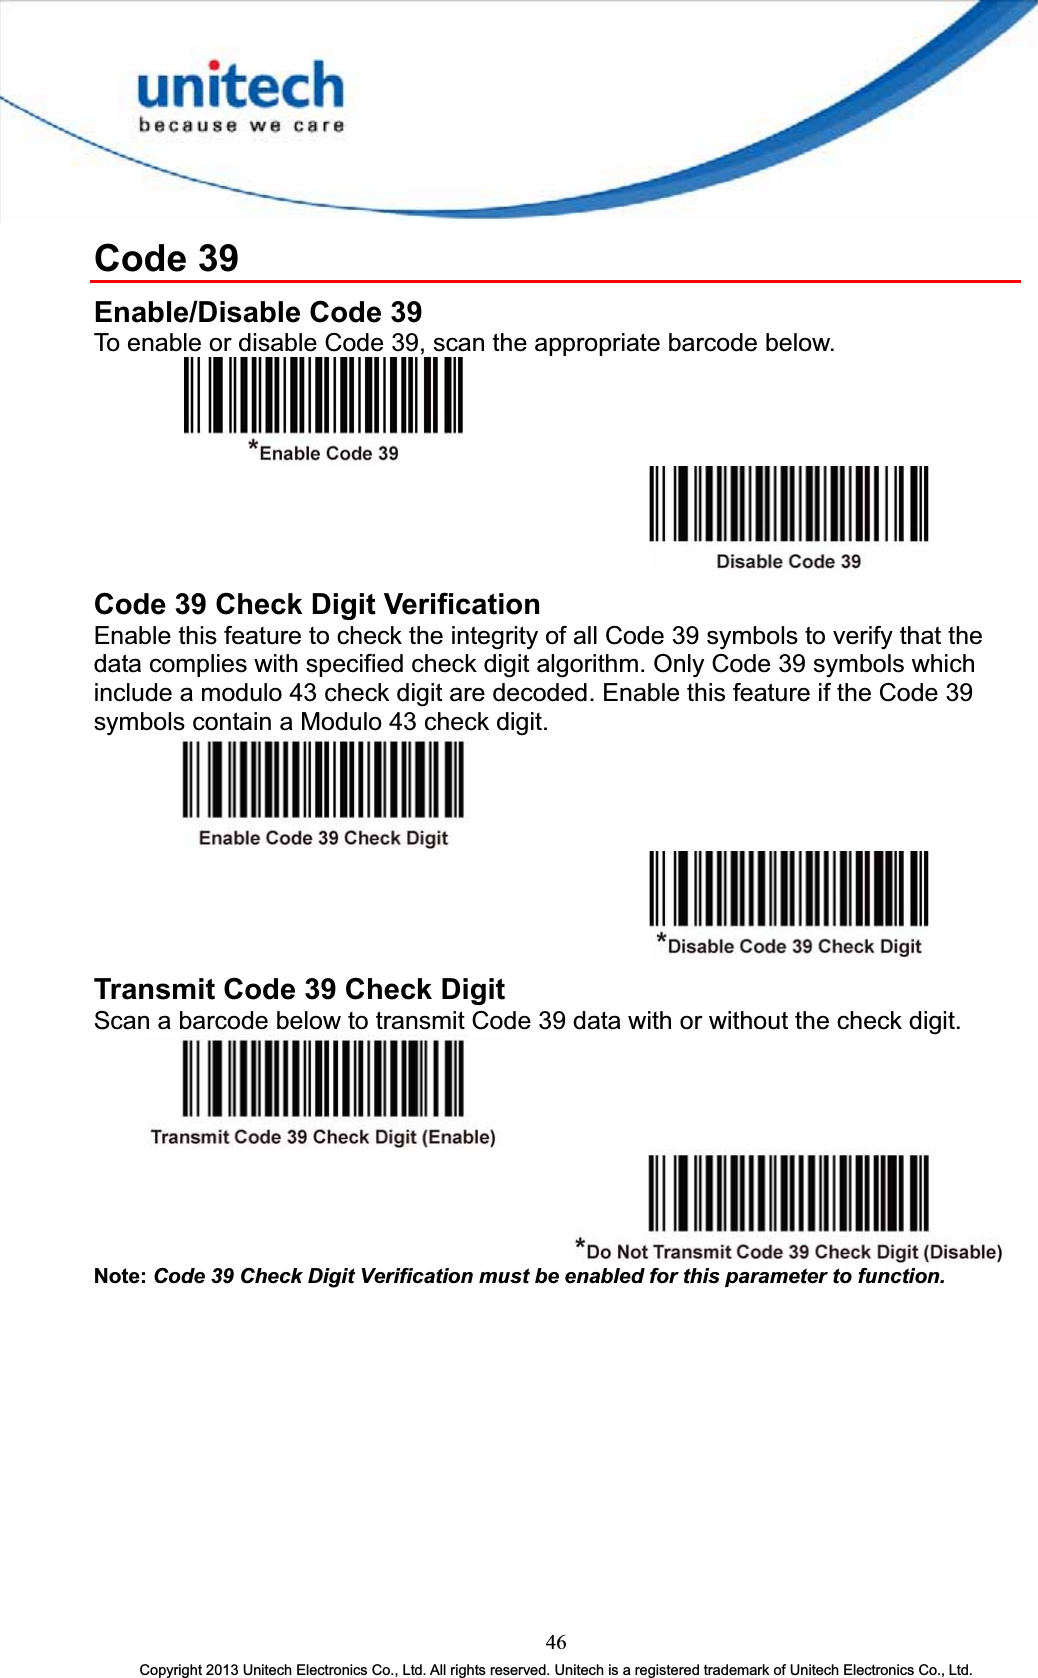 Code 39 Enable/Disable Code 39 To enable or disable Code 39, scan the appropriate barcode below. Code 39 Check Digit Verification   Enable this feature to check the integrity of all Code 39 symbols to verify that the data complies with specified check digit algorithm. Only Code 39 symbols which include a modulo 43 check digit are decoded. Enable this feature if the Code 39 symbols contain a Modulo 43 check digit. Transmit Code 39 Check Digit Scan a barcode below to transmit Code 39 data with or without the check digit. Note: Code 39 Check Digit Verification must be enabled for this parameter to function.46Copyright 2013 Unitech Electronics Co., Ltd. All rights reserved. Unitech is a registered trademark of Unitech Electronics Co., Ltd. 